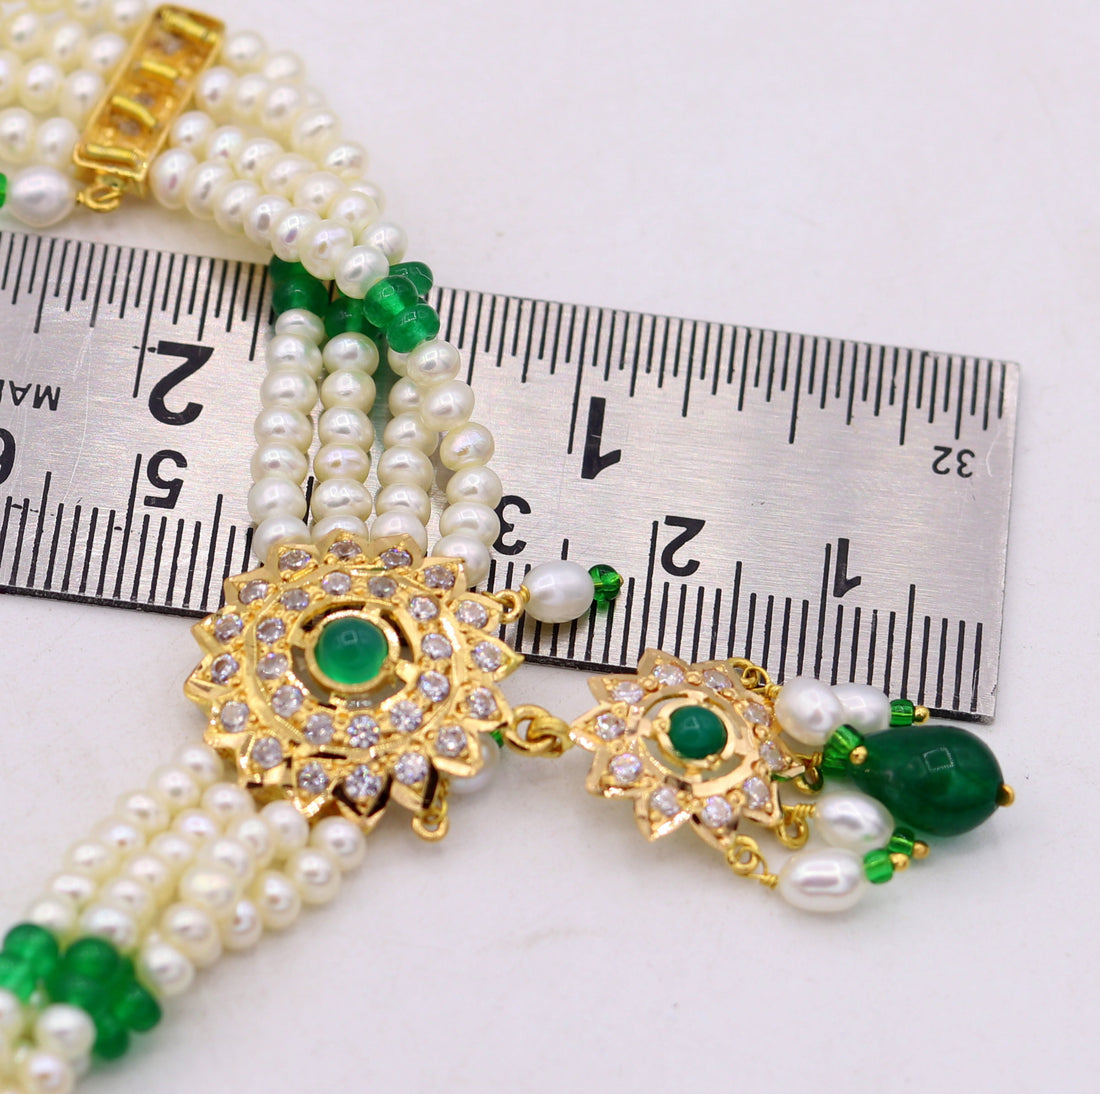 Vintage handmade 22karat yellow gold punjabi necklace with earrings, Fabulous green stone pearl necklace set wedding jewelry - TRIBAL ORNAMENTS